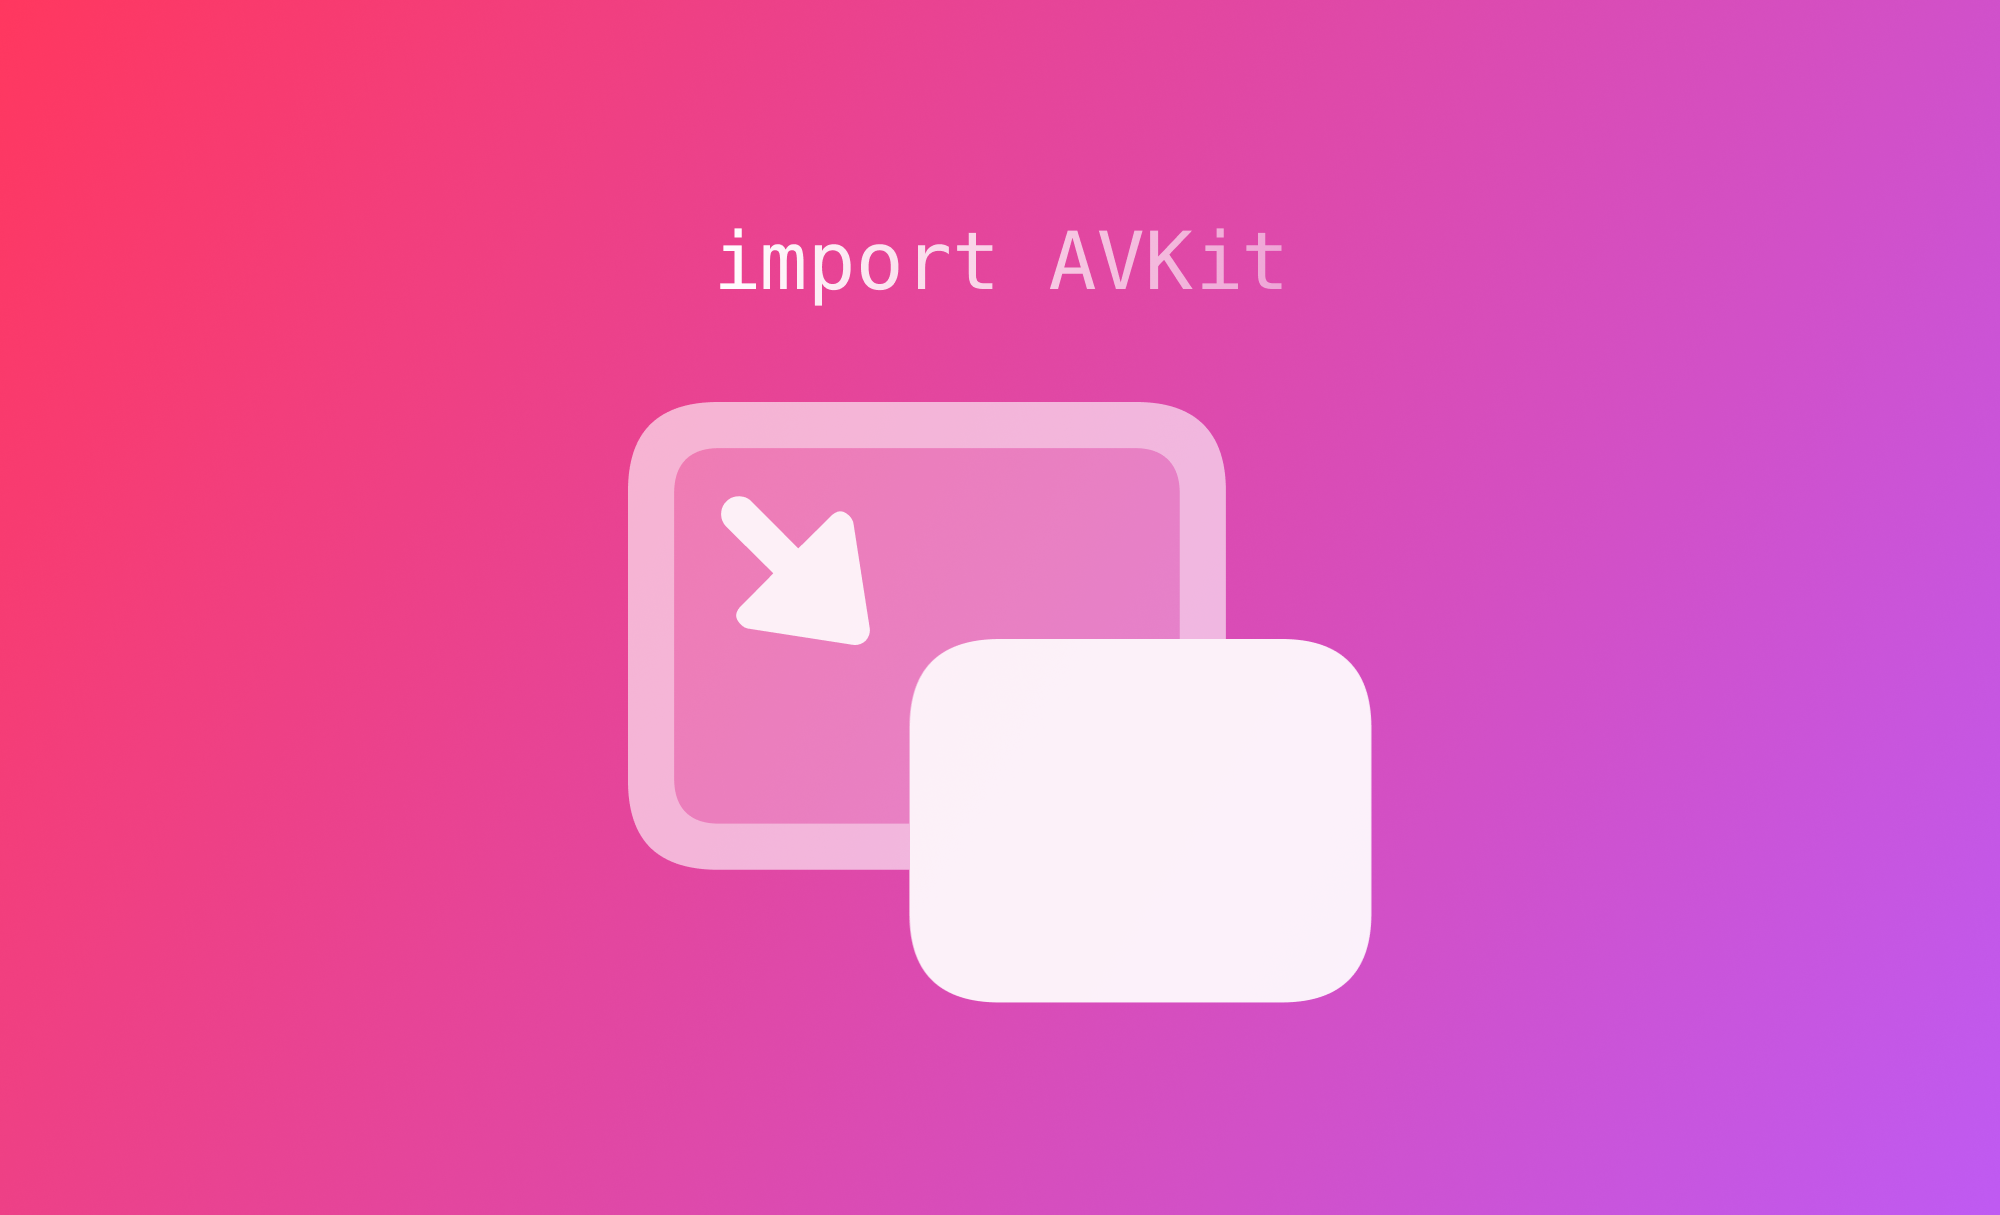 Implementing Picture-In-Picture with AVKit and SwiftUI